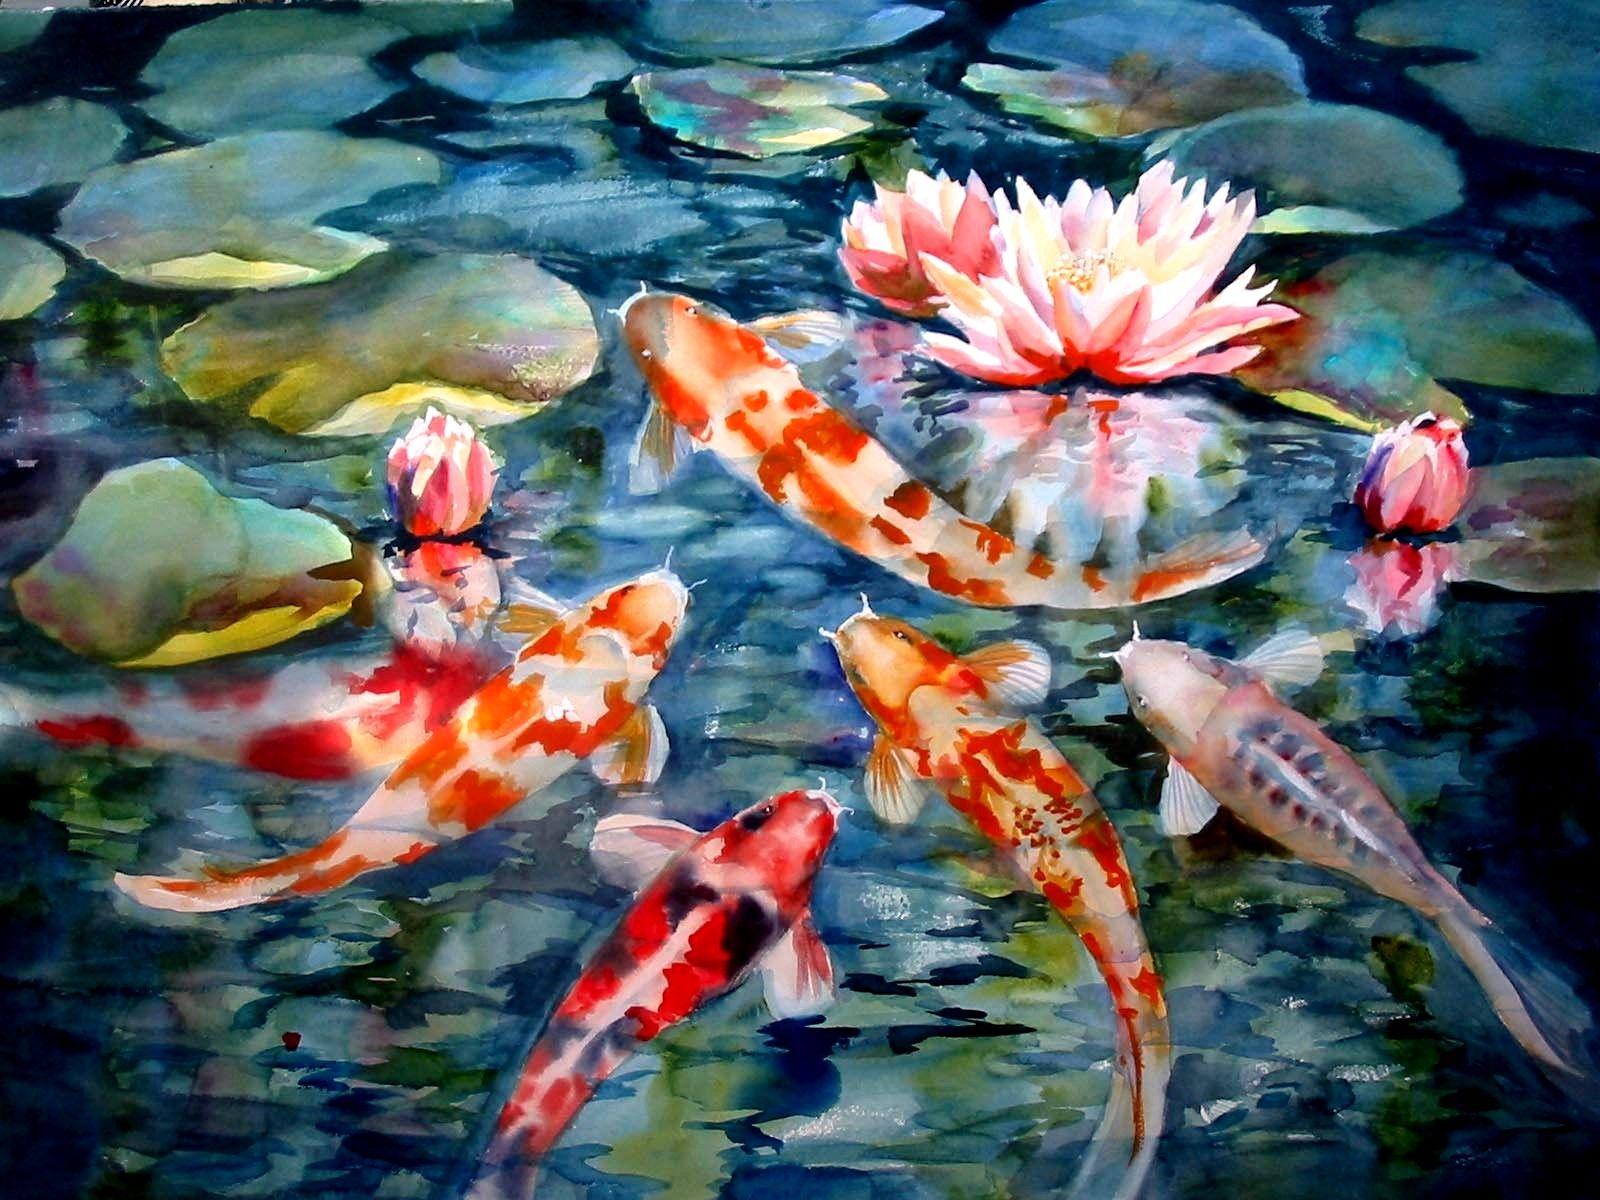 Watercolor painting of colorful koi fish swimming in a pond - Koi fish